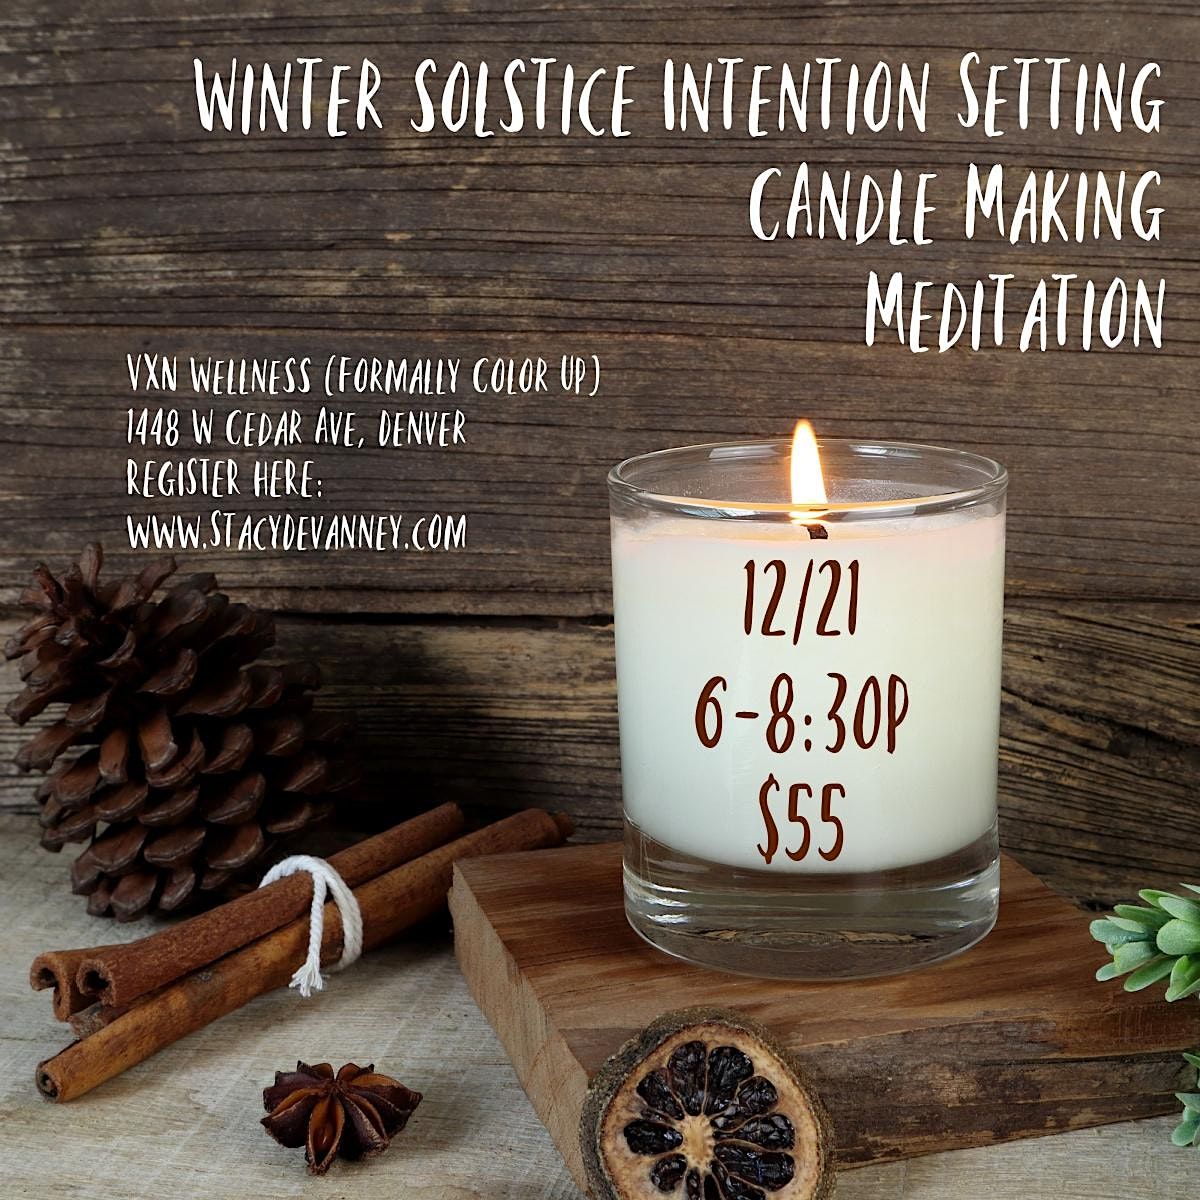 Winter Solstice Intention Setting + Candle Making + Meditation